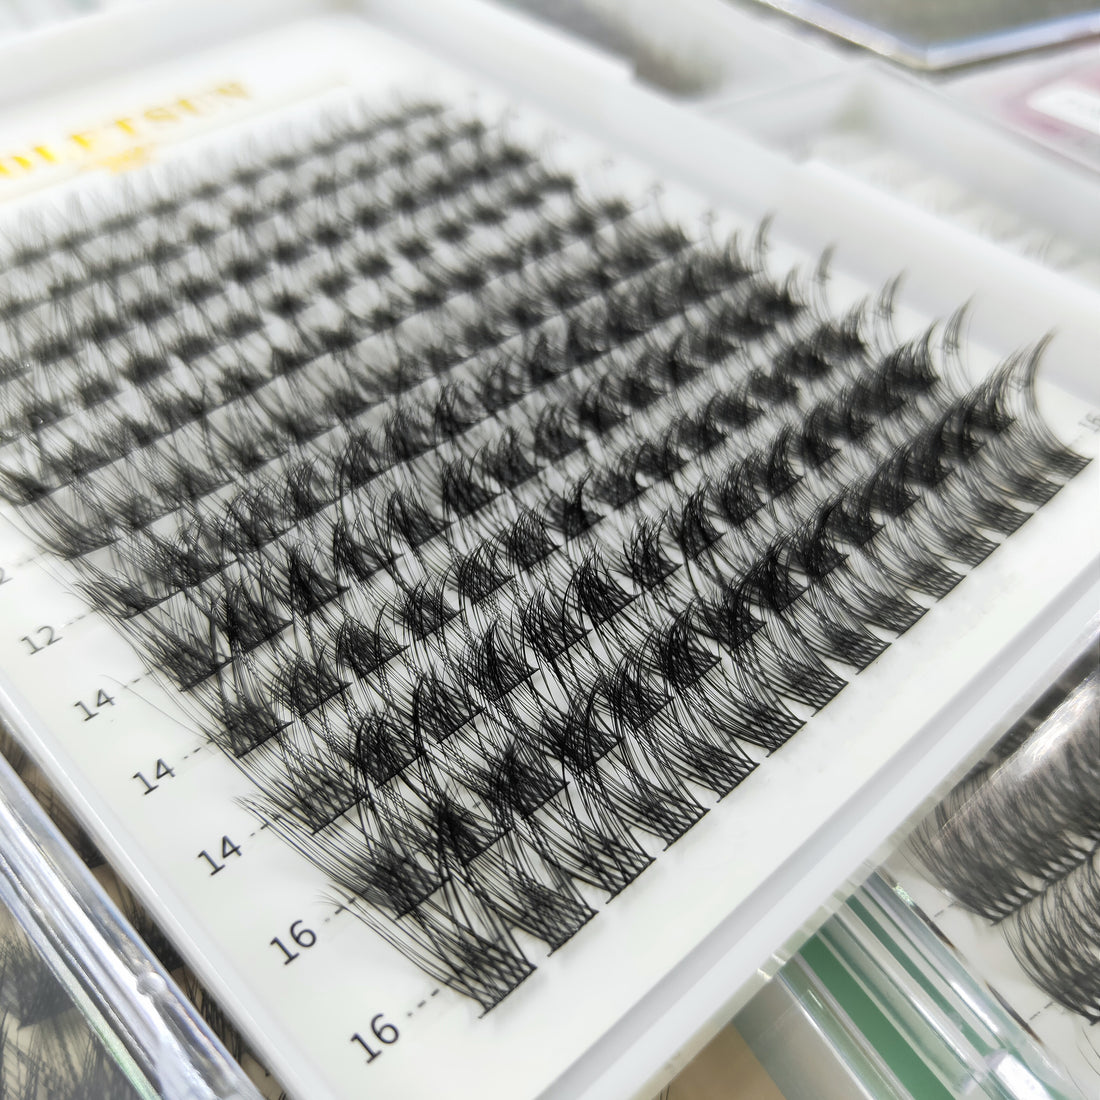 Production Private Label Segmented Eyelashes Supplier